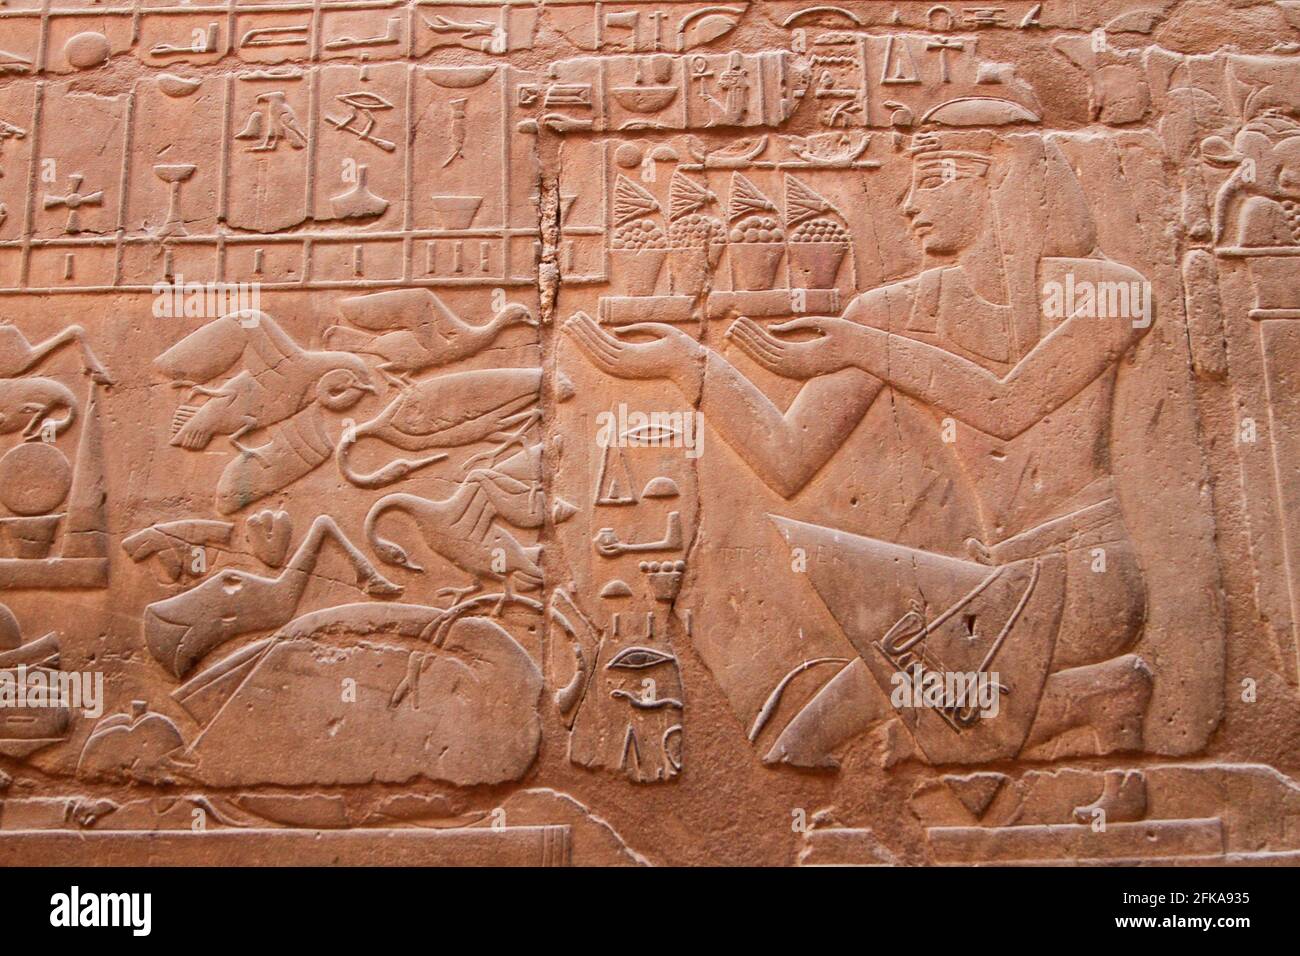 Carved sandstone relief of pharaoh and hieroglyphics on wall at Karnak Temple, Luxor, Egypt Stock Photo